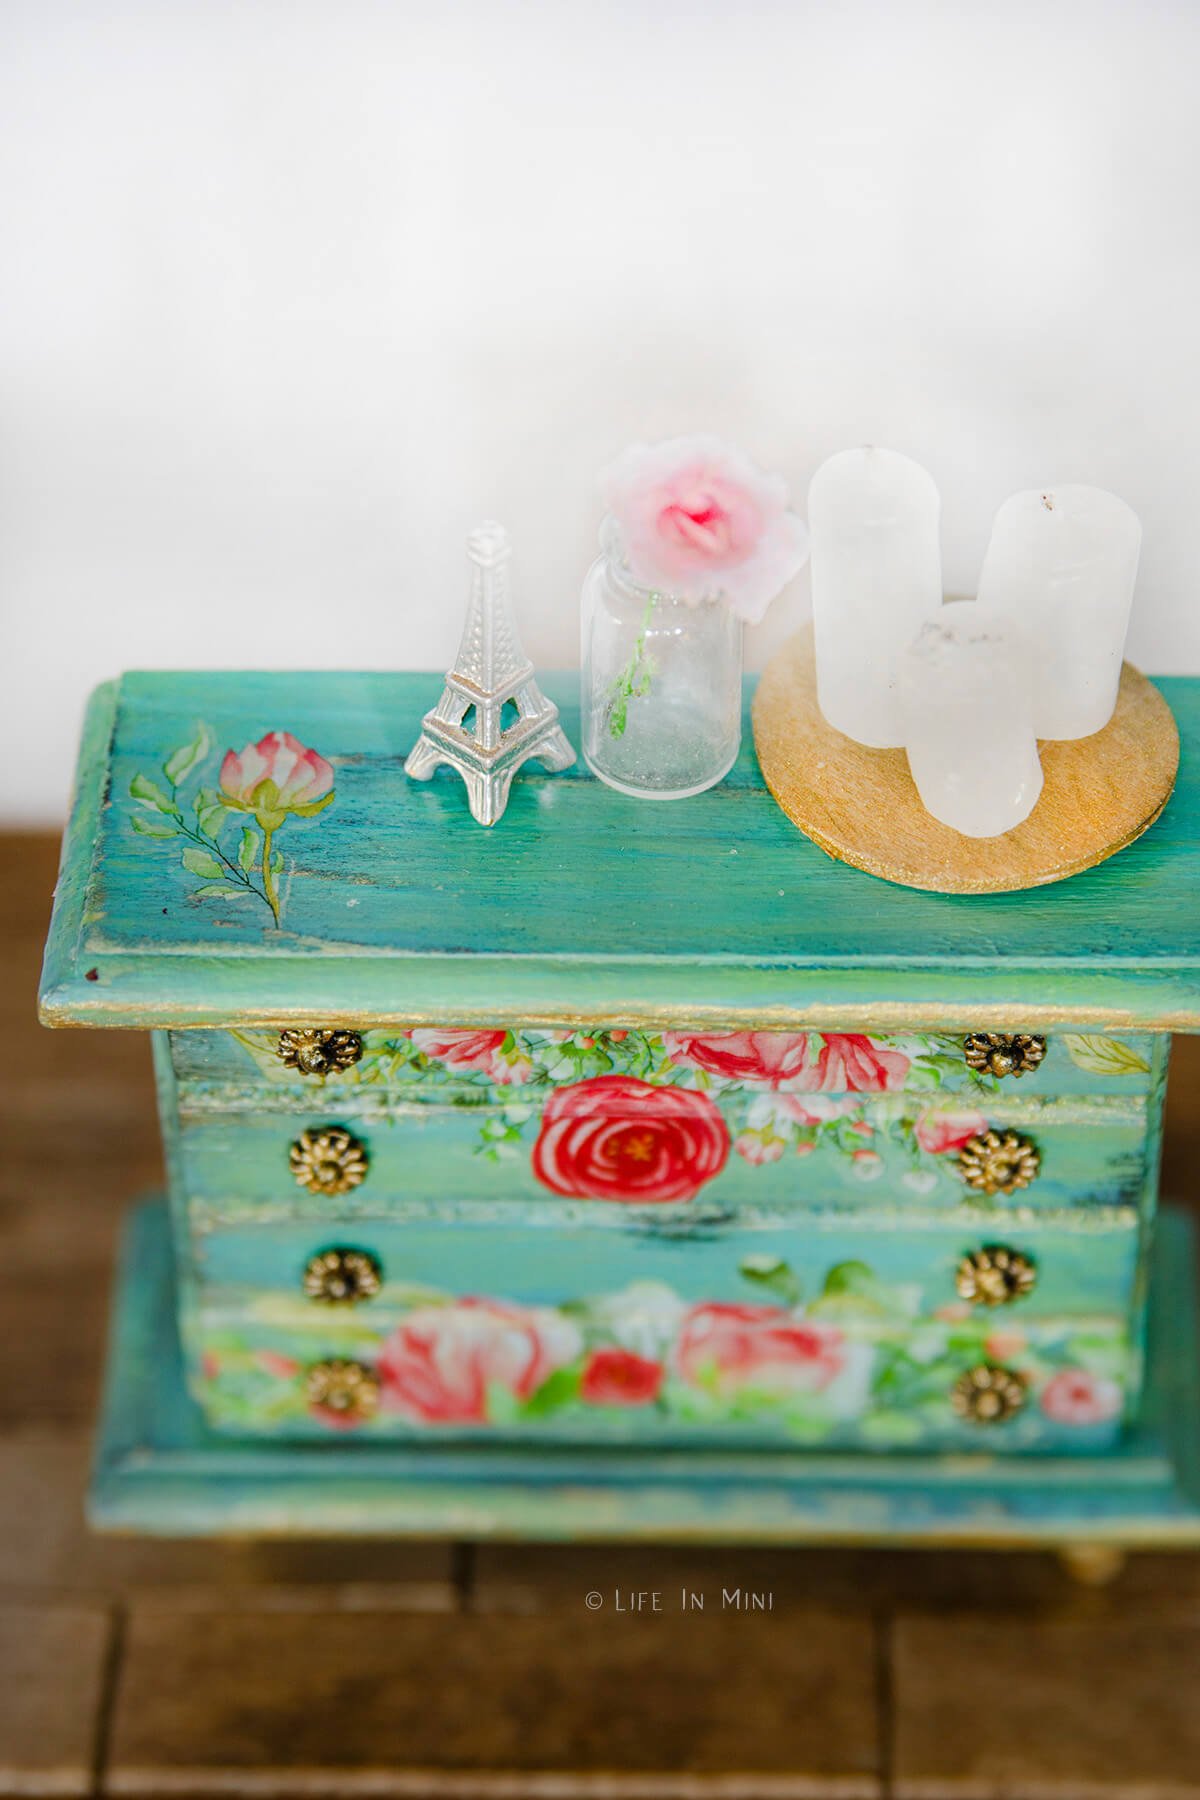 Closeup of miniature accessories sitting on top of a teal dollhouse dresser with floral rub ons